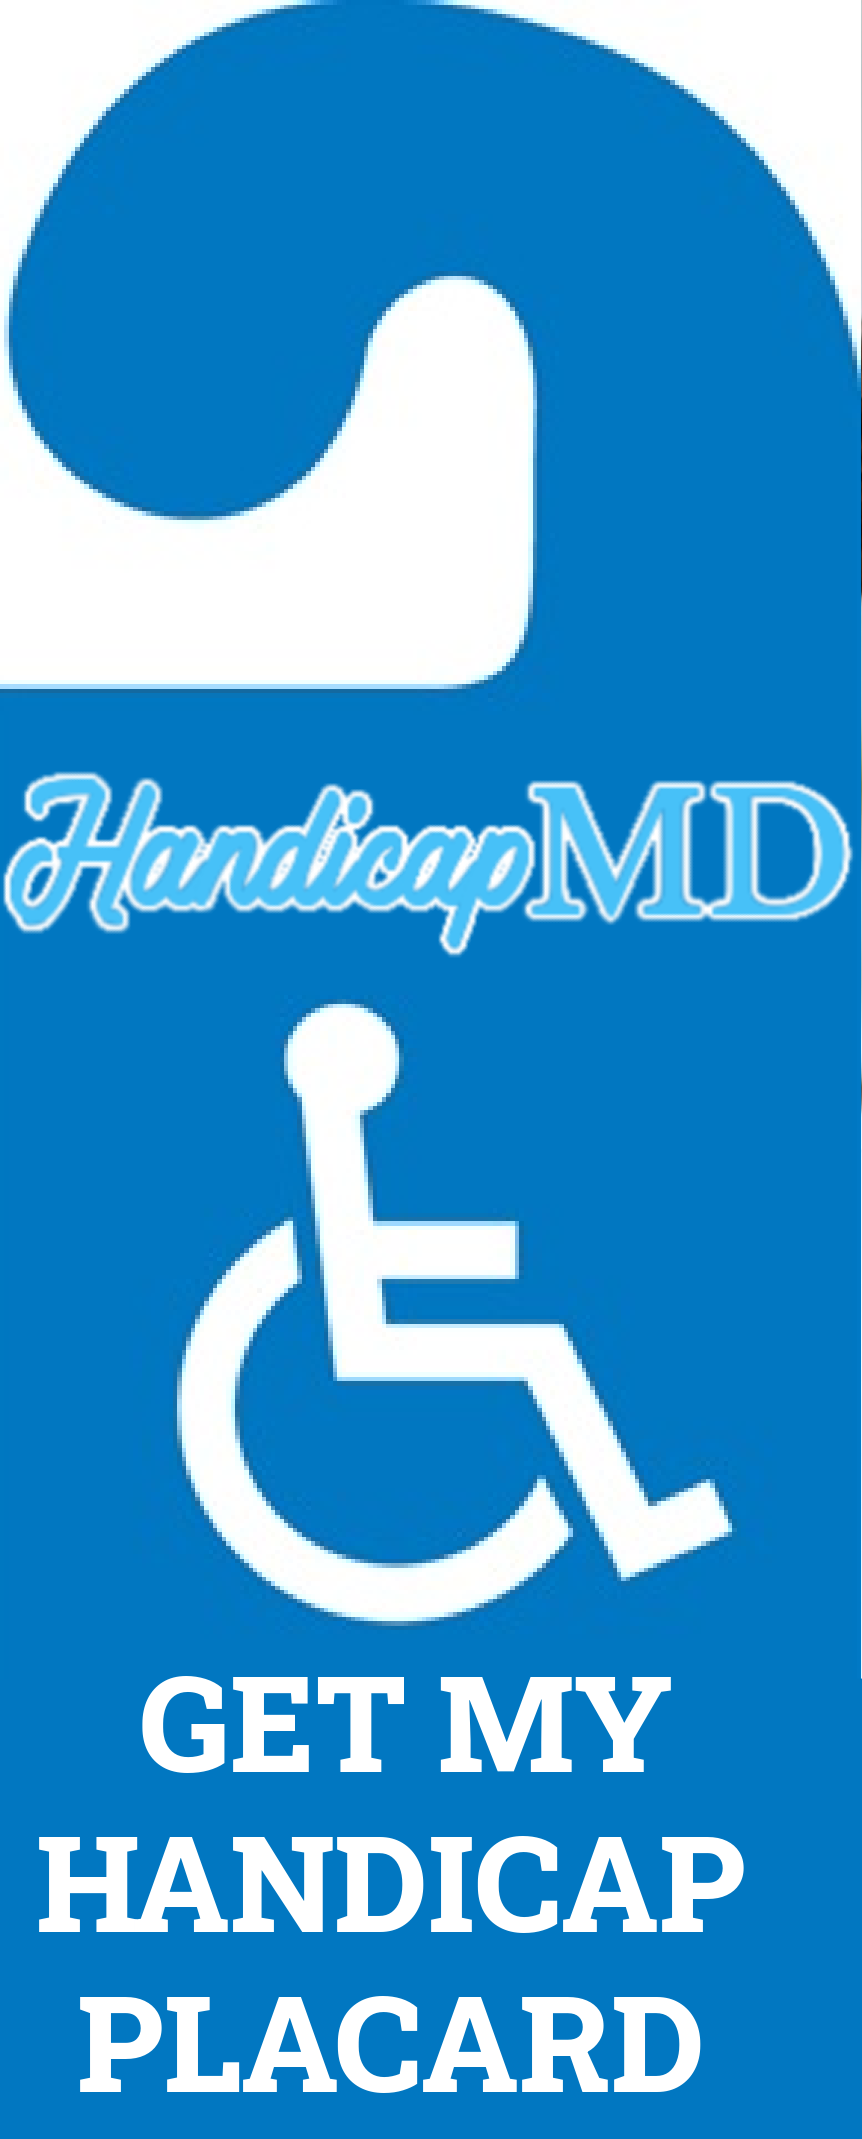 Myths vs. Facts: Debunking Common Misconceptions about Handicap Placards in North Dakota